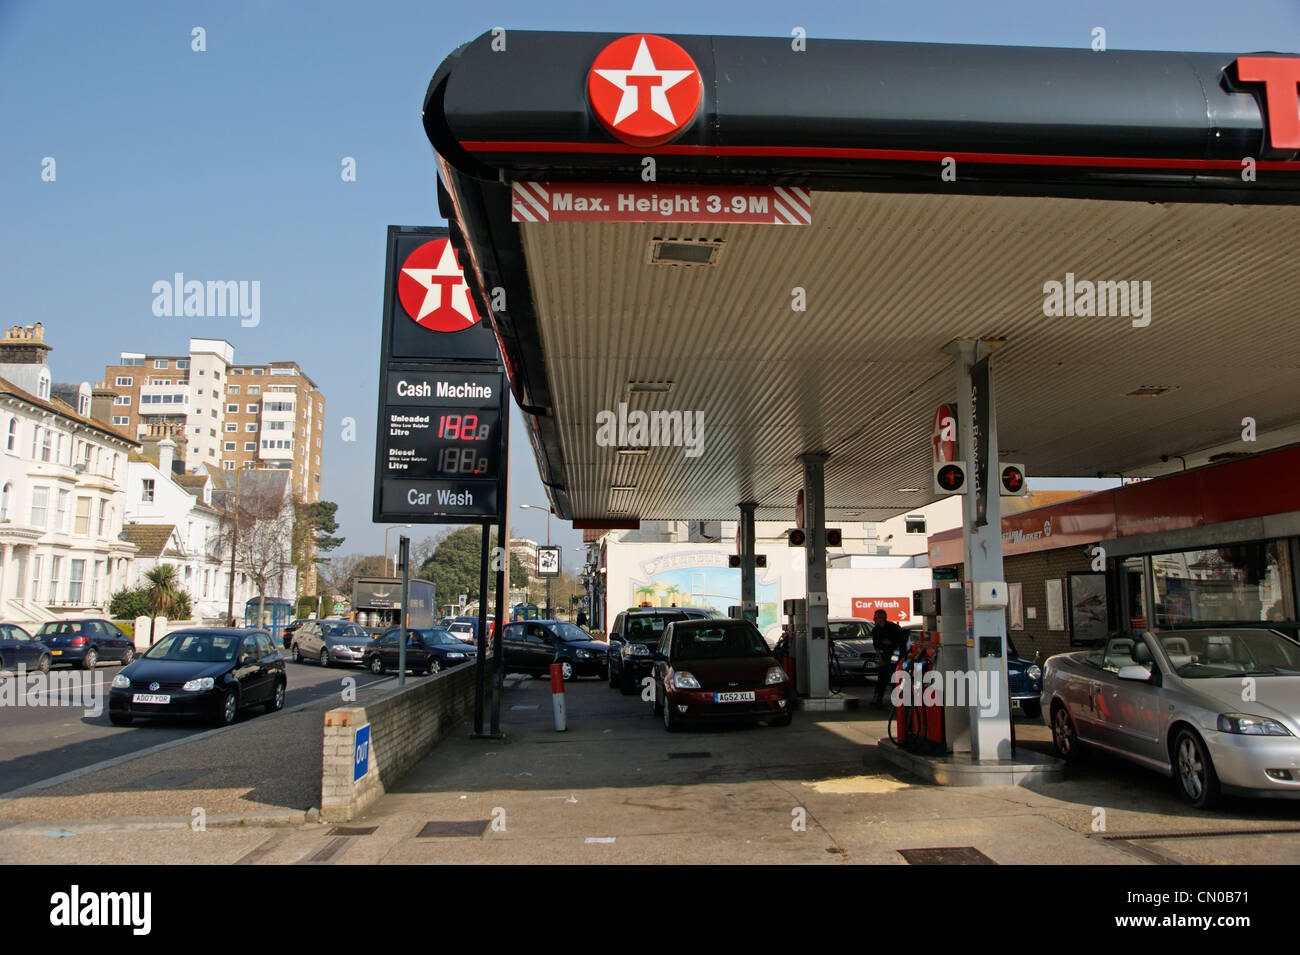 Fuel crisis - Texaco petrol station garage forecourt full of cars with vehicles queueing in the road Stock Photo